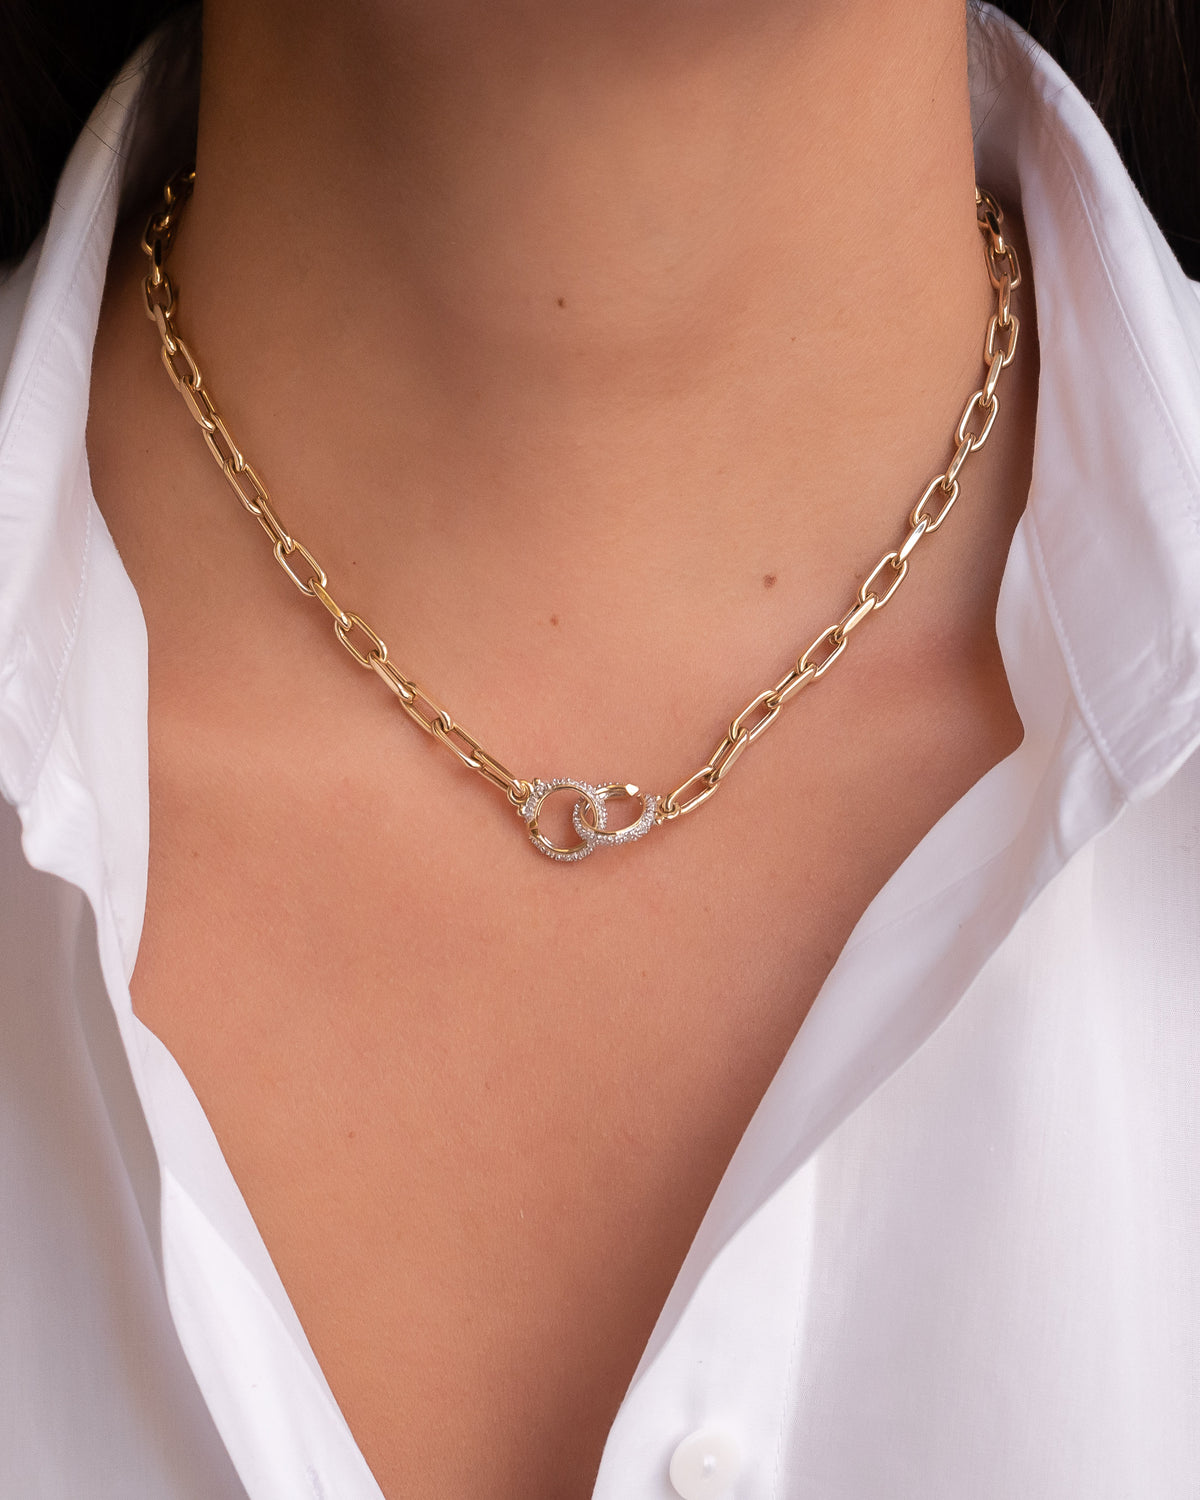 14k Gold Large Open Link Chain with Diamond Handcuffs Necklace